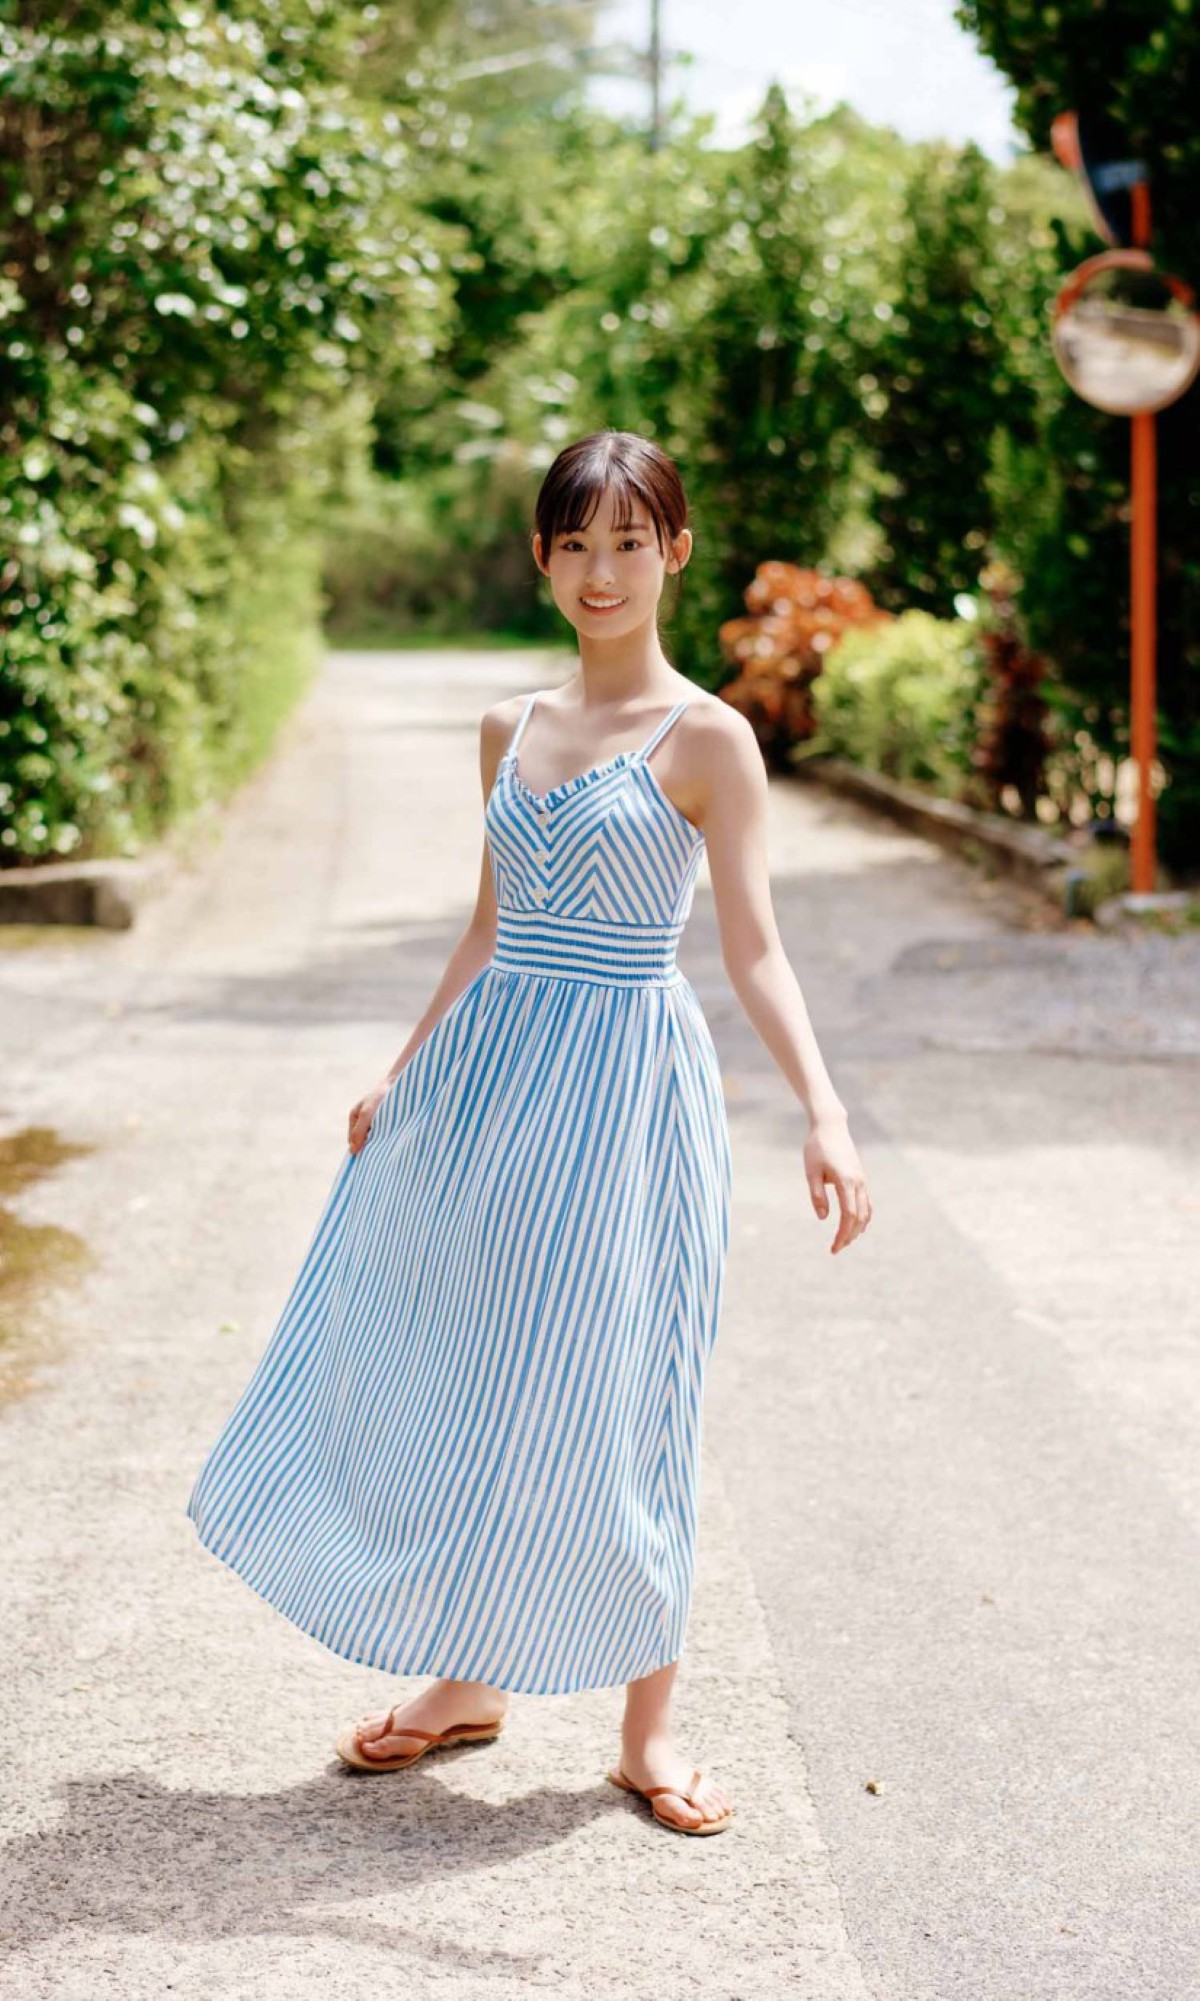 Photobook Ayaka Imoto 井本彩花 The Heroine Is Dignified And Beautiful 17 Years Old 0061 1823846532.jpg